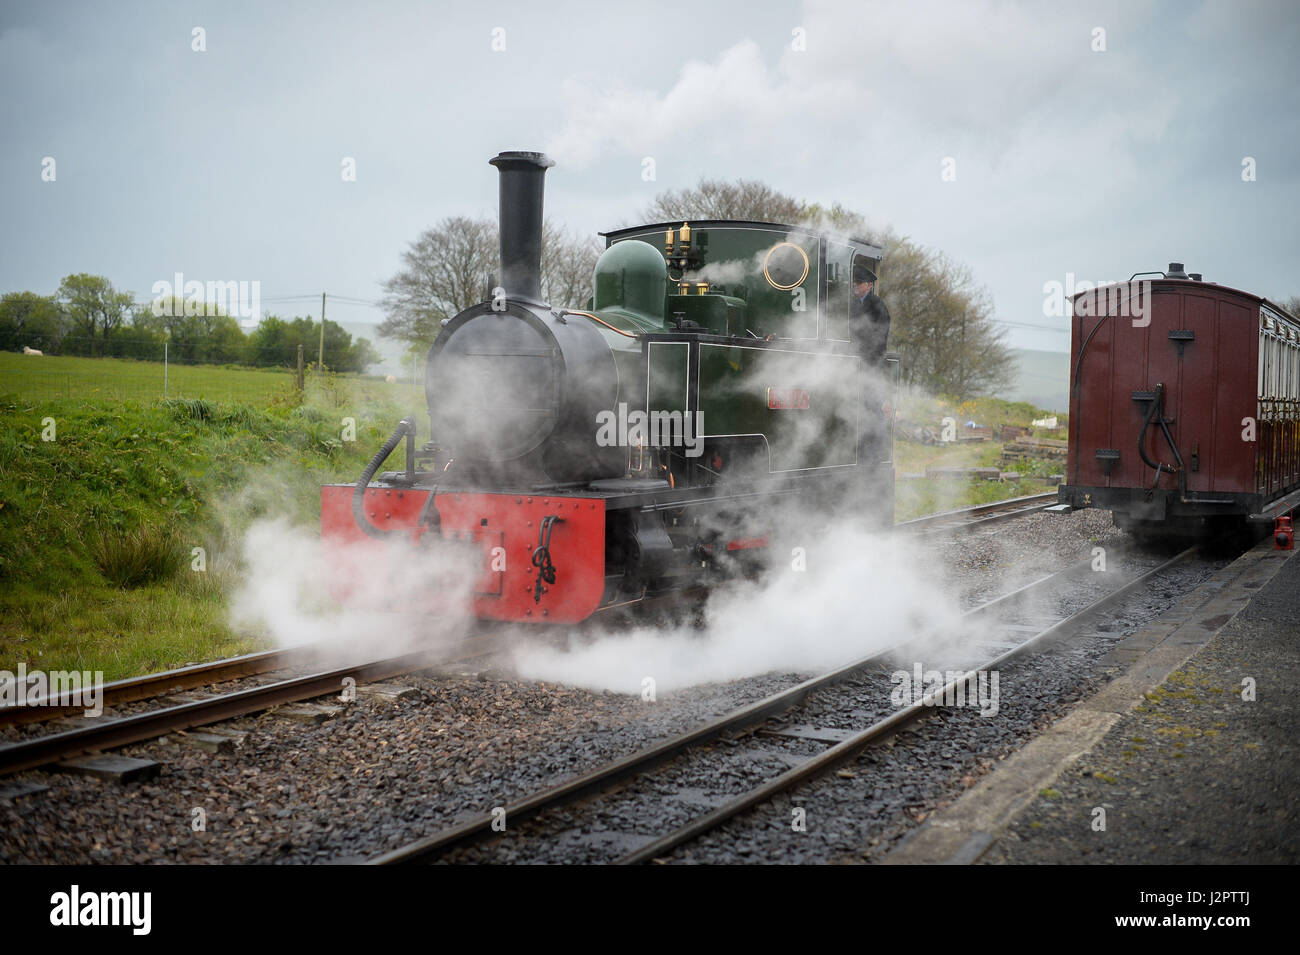 Isaac, a 1952 narrow gauge steam locomotive, chugs on the line at Woody Bay station on the reopened railway section between Lynton and Barnstaple, Devon. Stock Photo